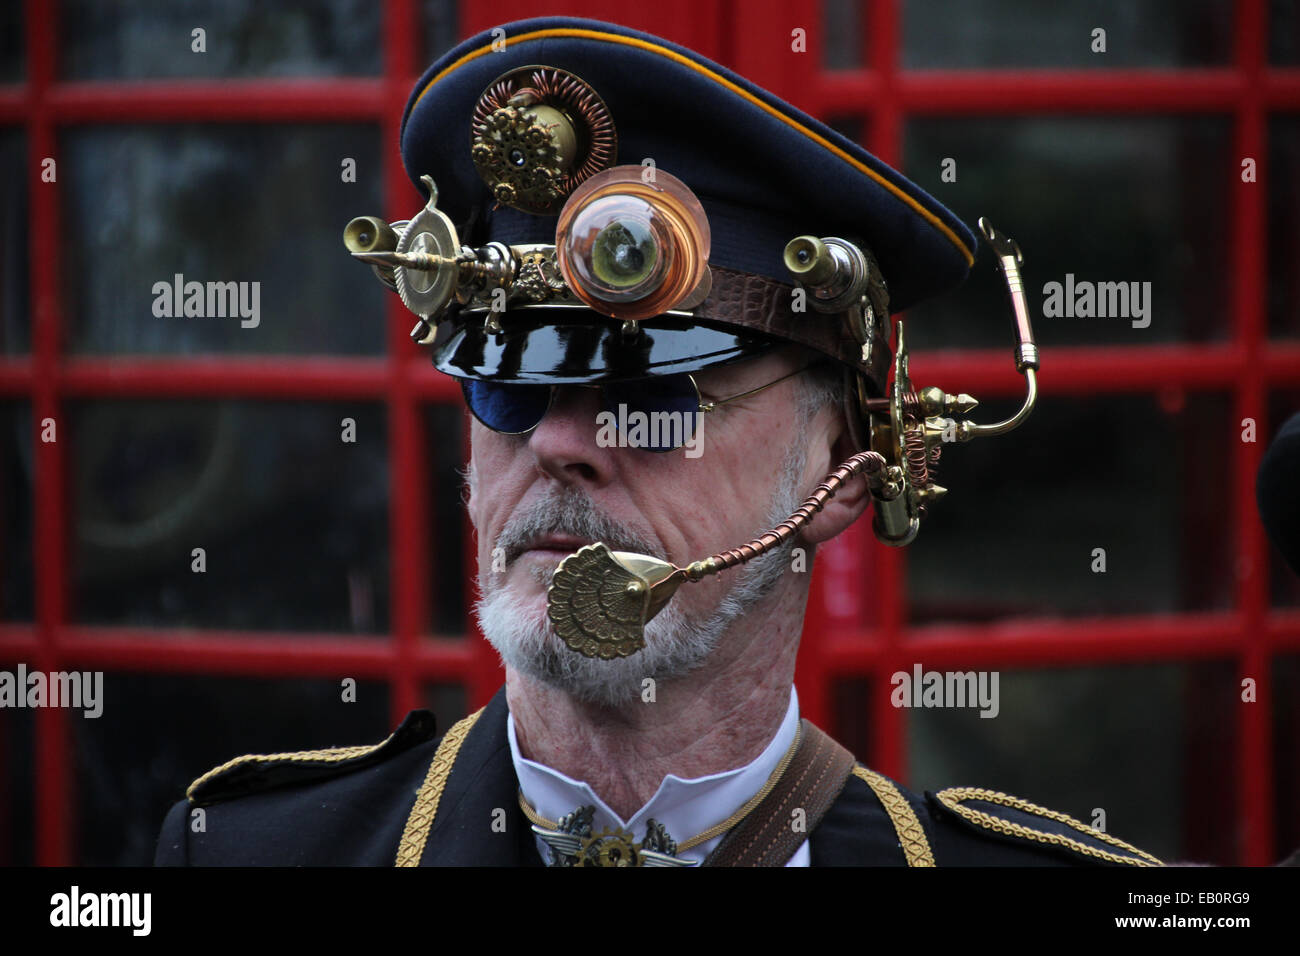 Man dressed in a steampunk military costume at Haworth steampunk weekend 23.11.2014 Stock Photo